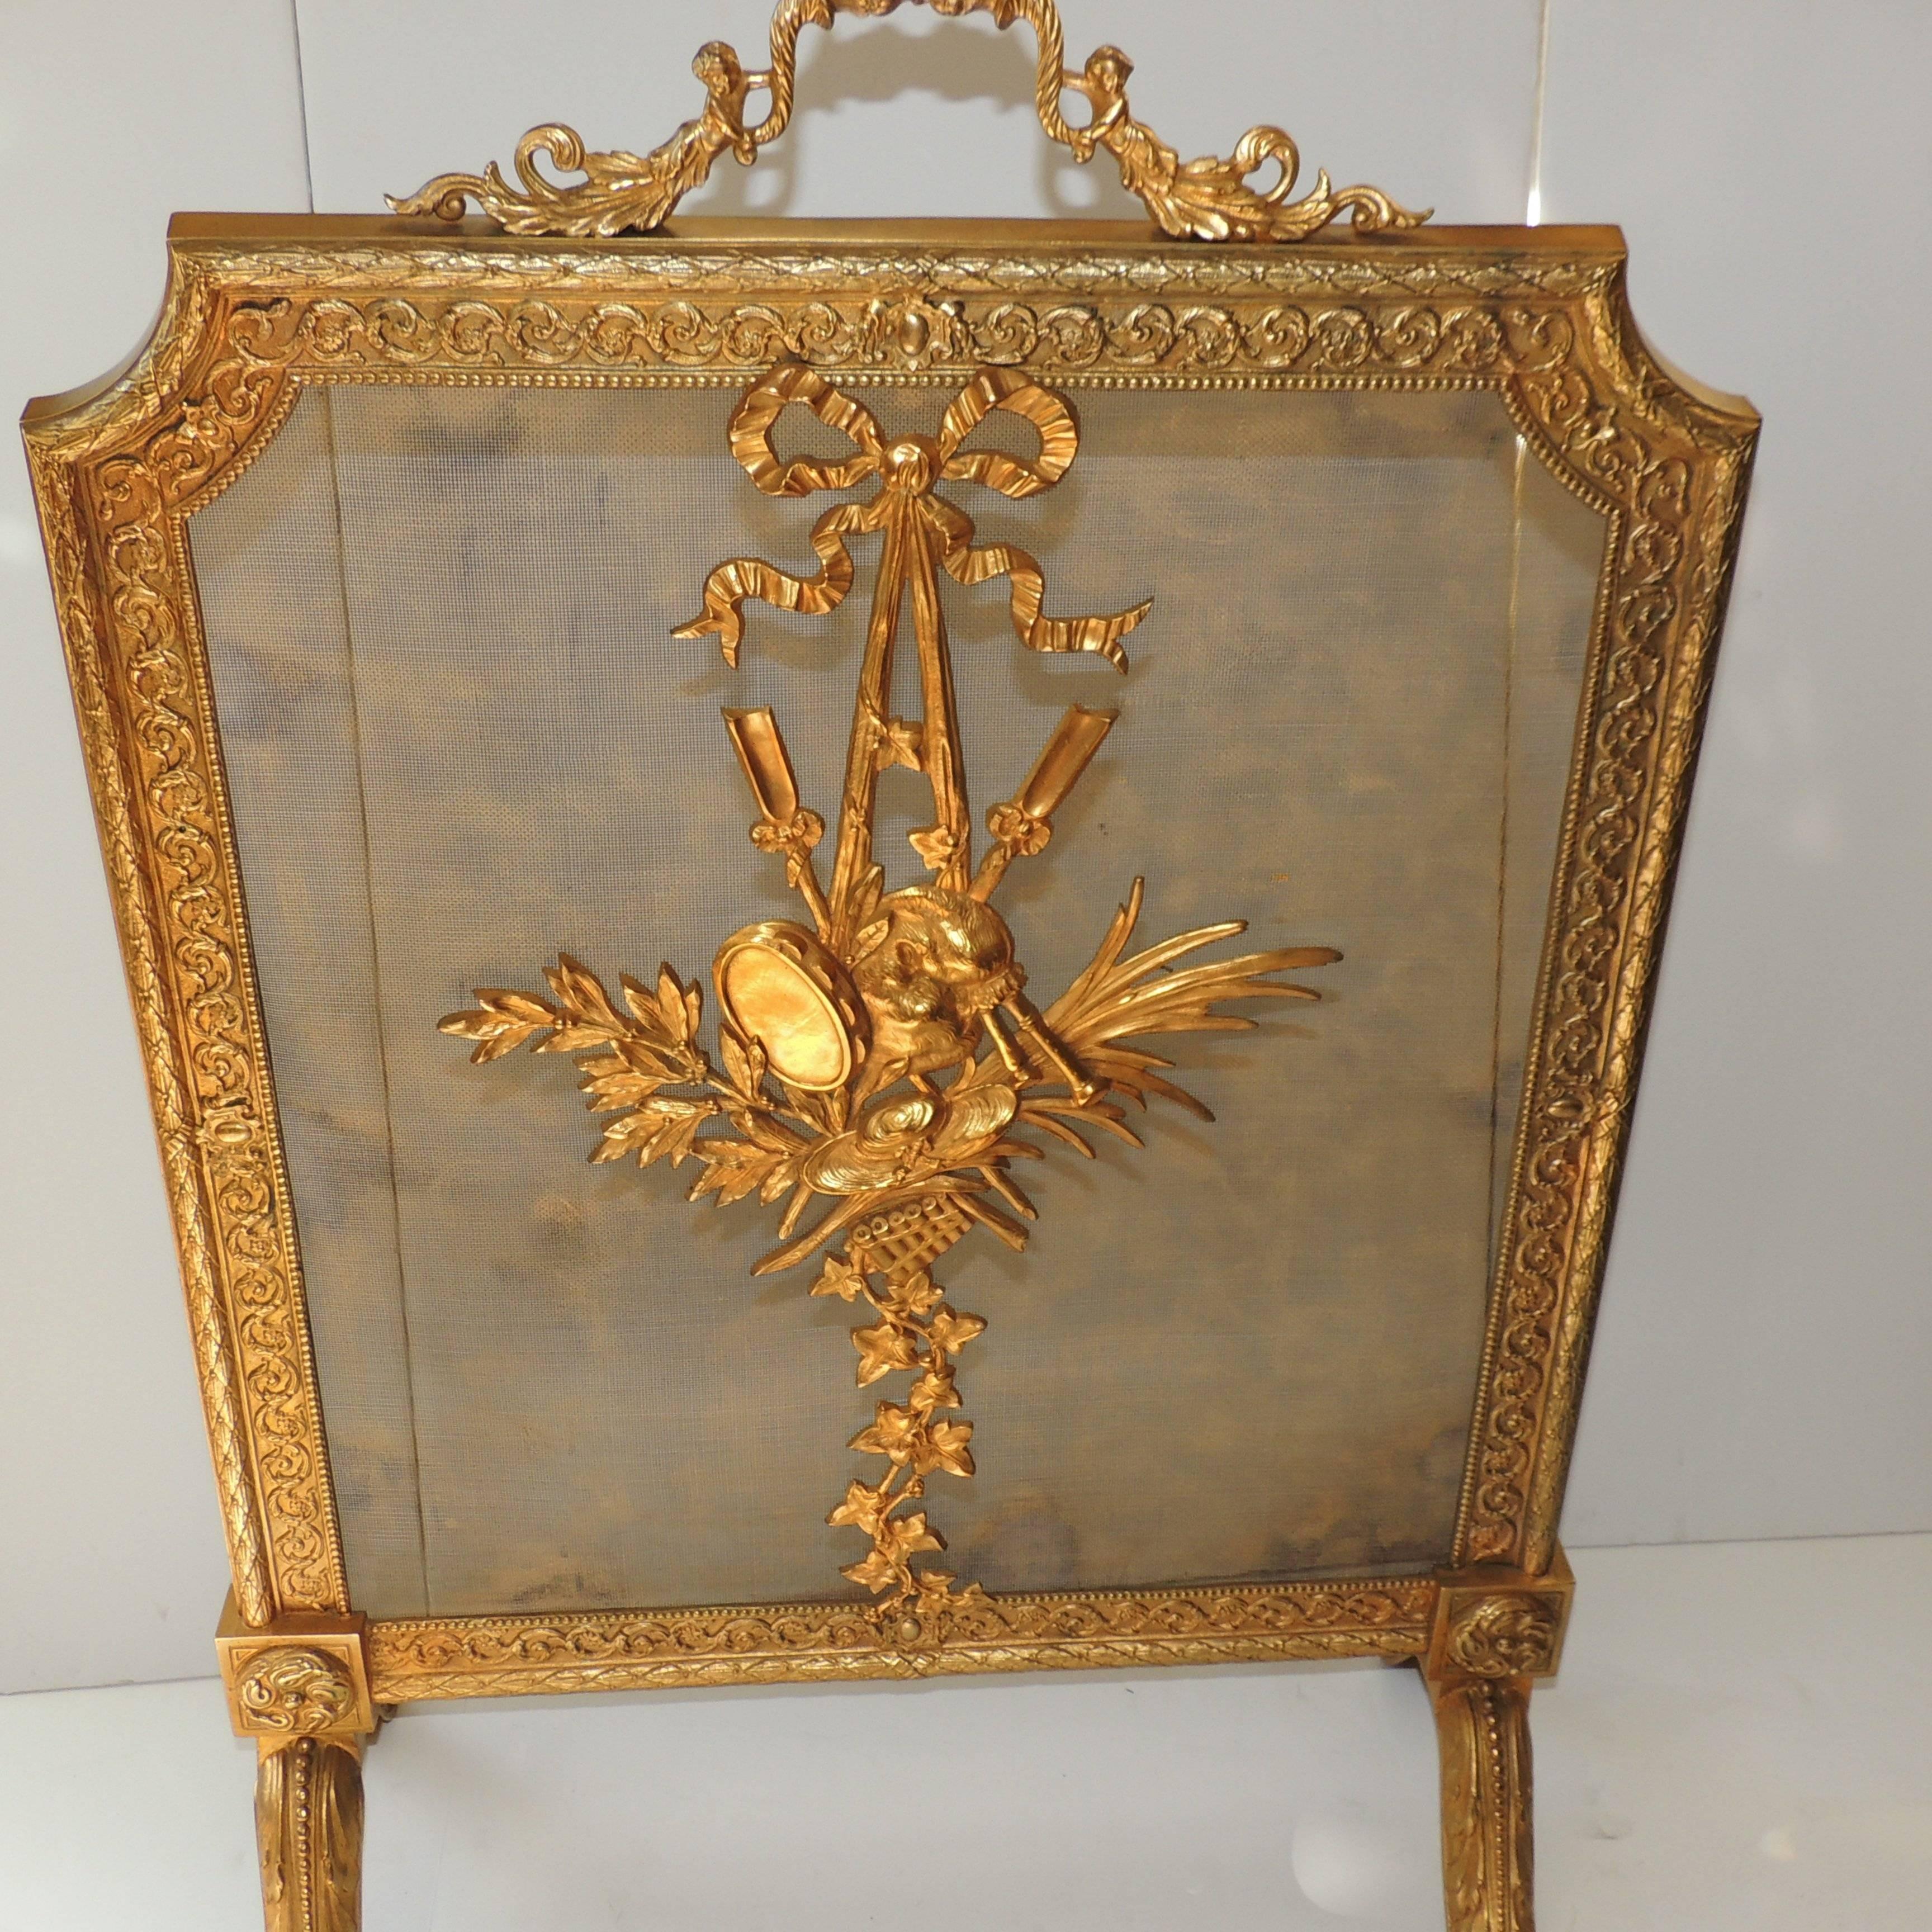 Wonderful doré bronze fire place screen decorated with filigree edging, corner medallions and flutes in a spray of leaves topped with a bronze ribbon and bow.

Measures: 24.5